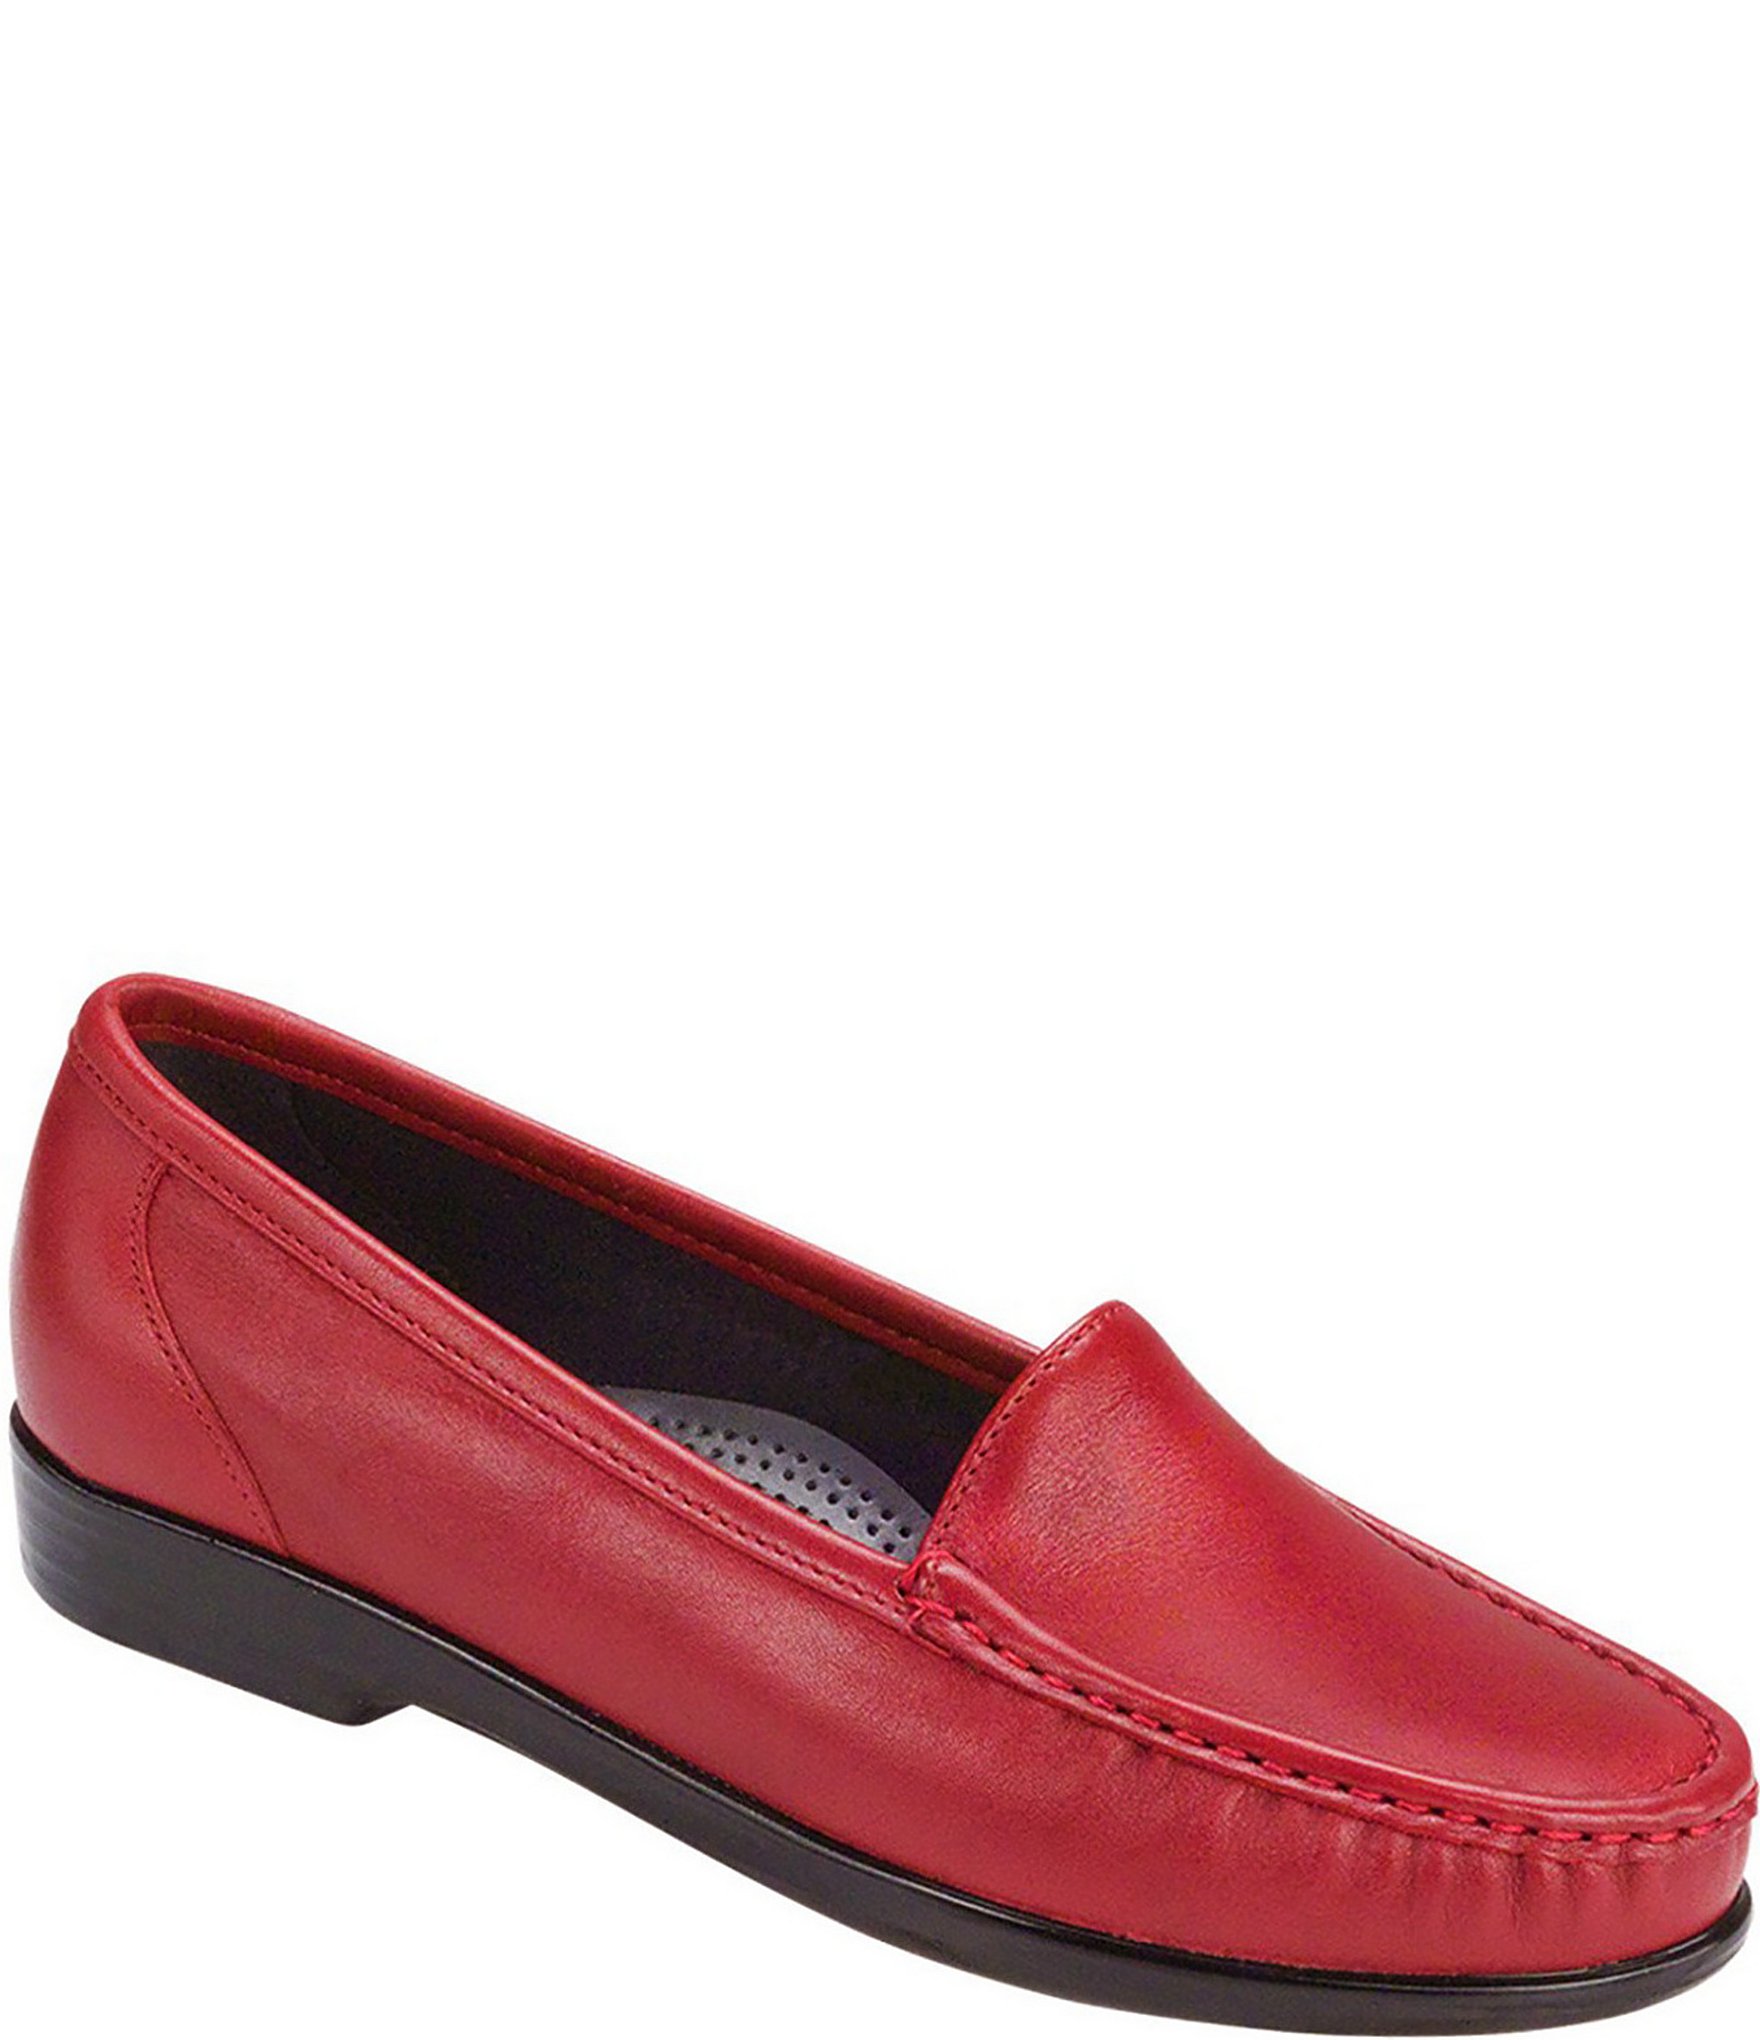 red flats wide width